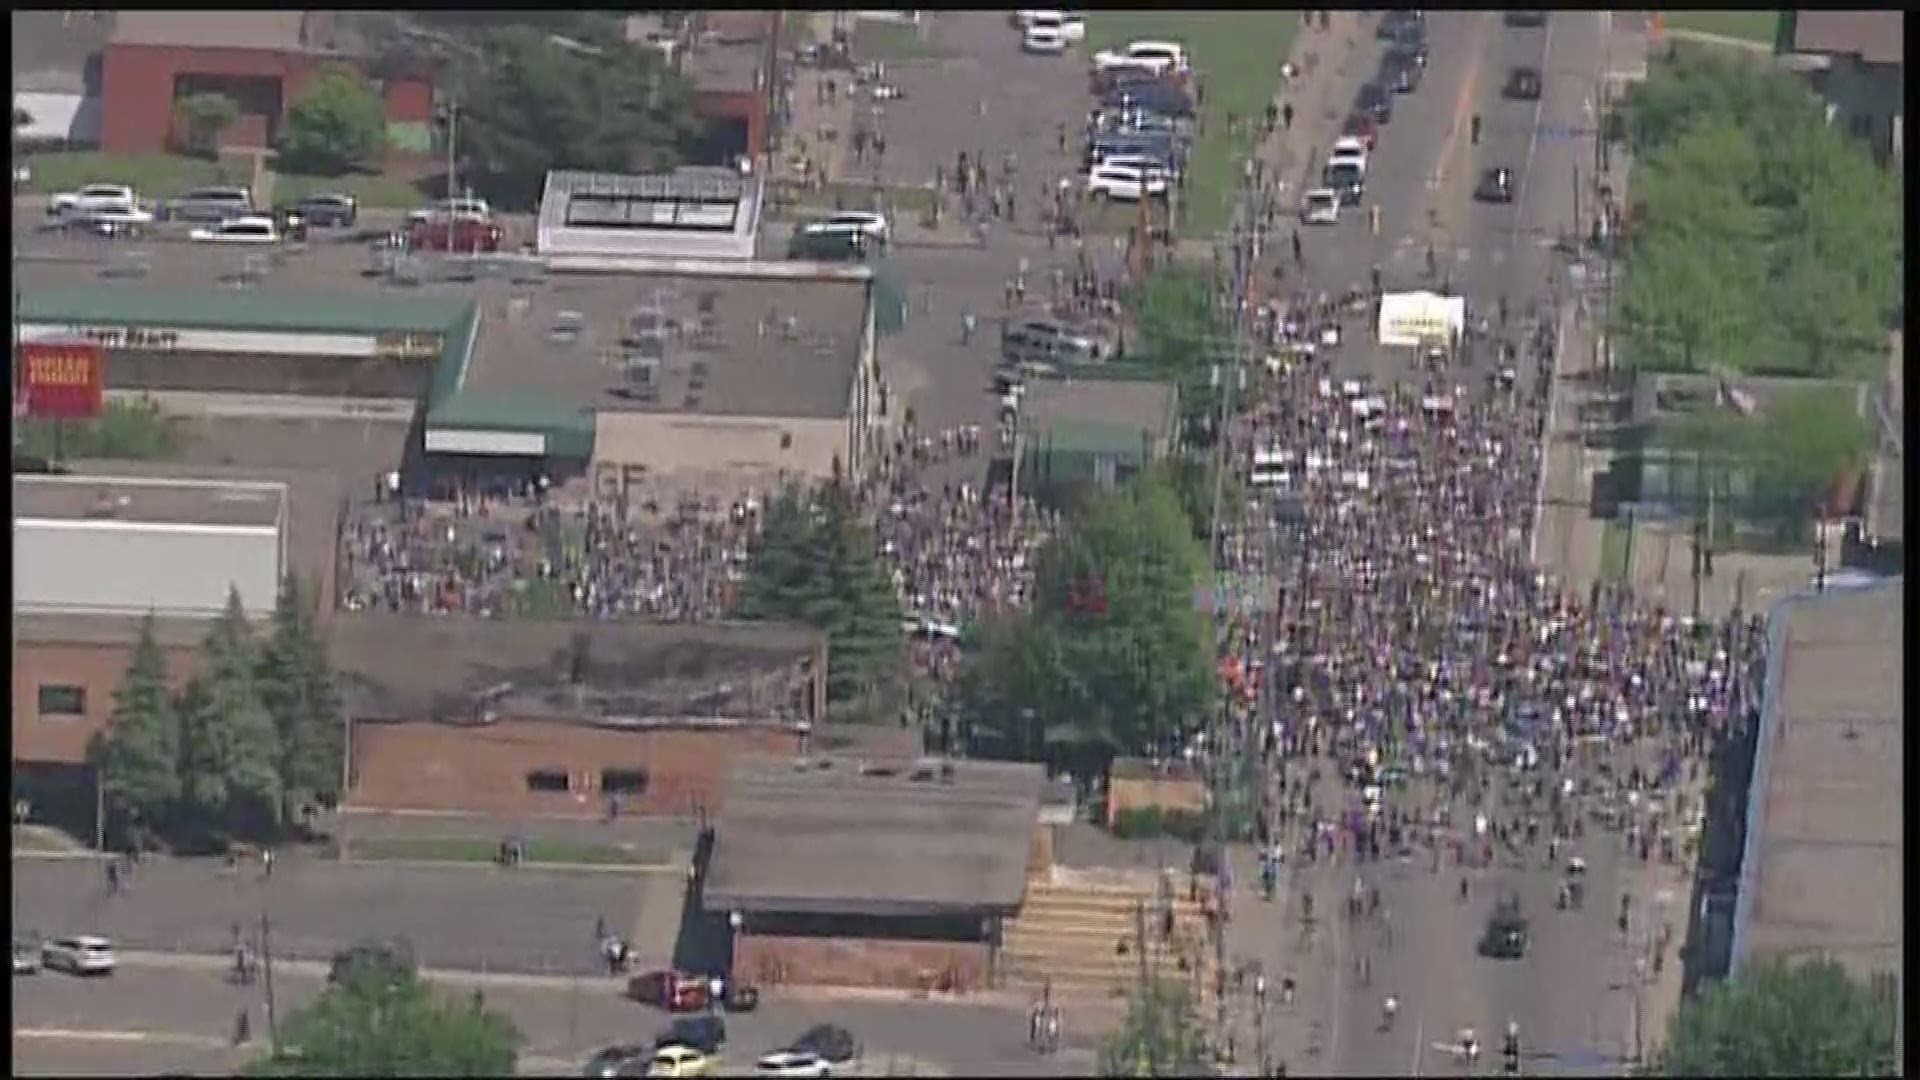 Peaceful demonstrations happening Saturday afternoon in Minneapolis after another night of unrest.